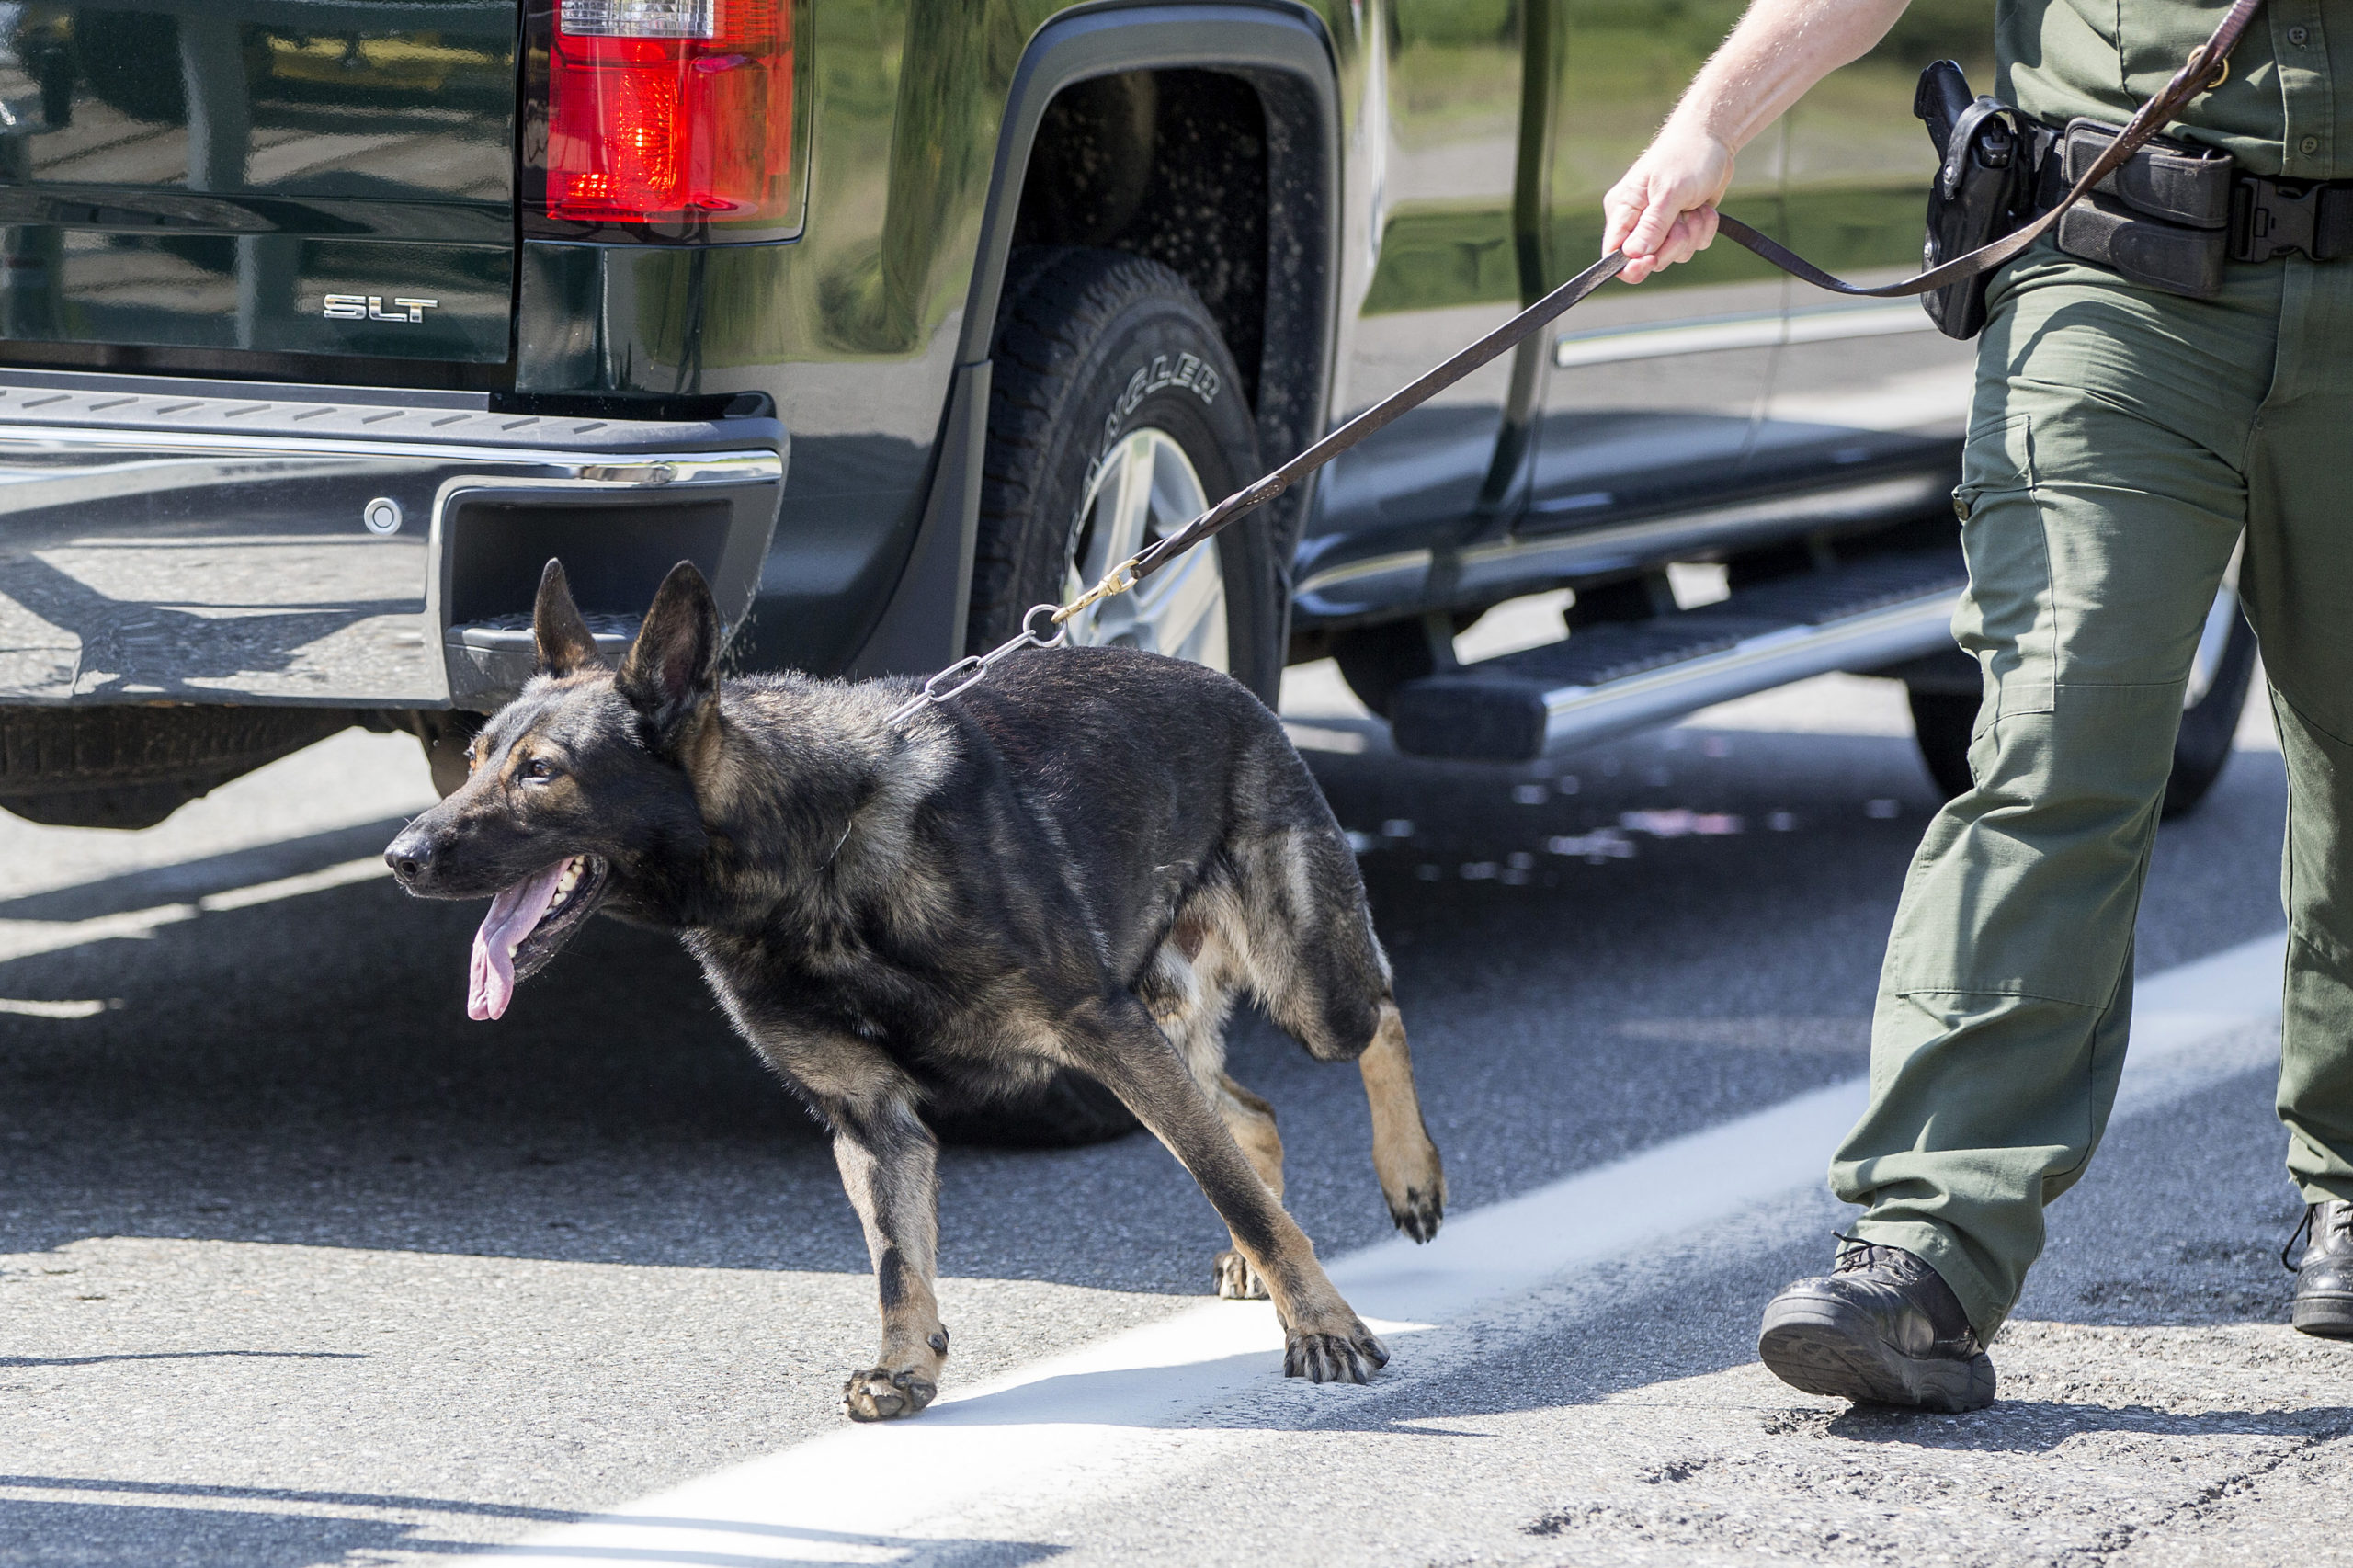 WEST ENFIELD, ME - AUGUST 01: A U.S. Border Patrol agent uses his K9 to look for drugs and hidden people at a highway checkpoint on August 1, 2018 in West Enfield, Maine. The checkpoint took place approximately 80 miles from the US/Canada border. (Photo by Scott Eisen/Getty Images)